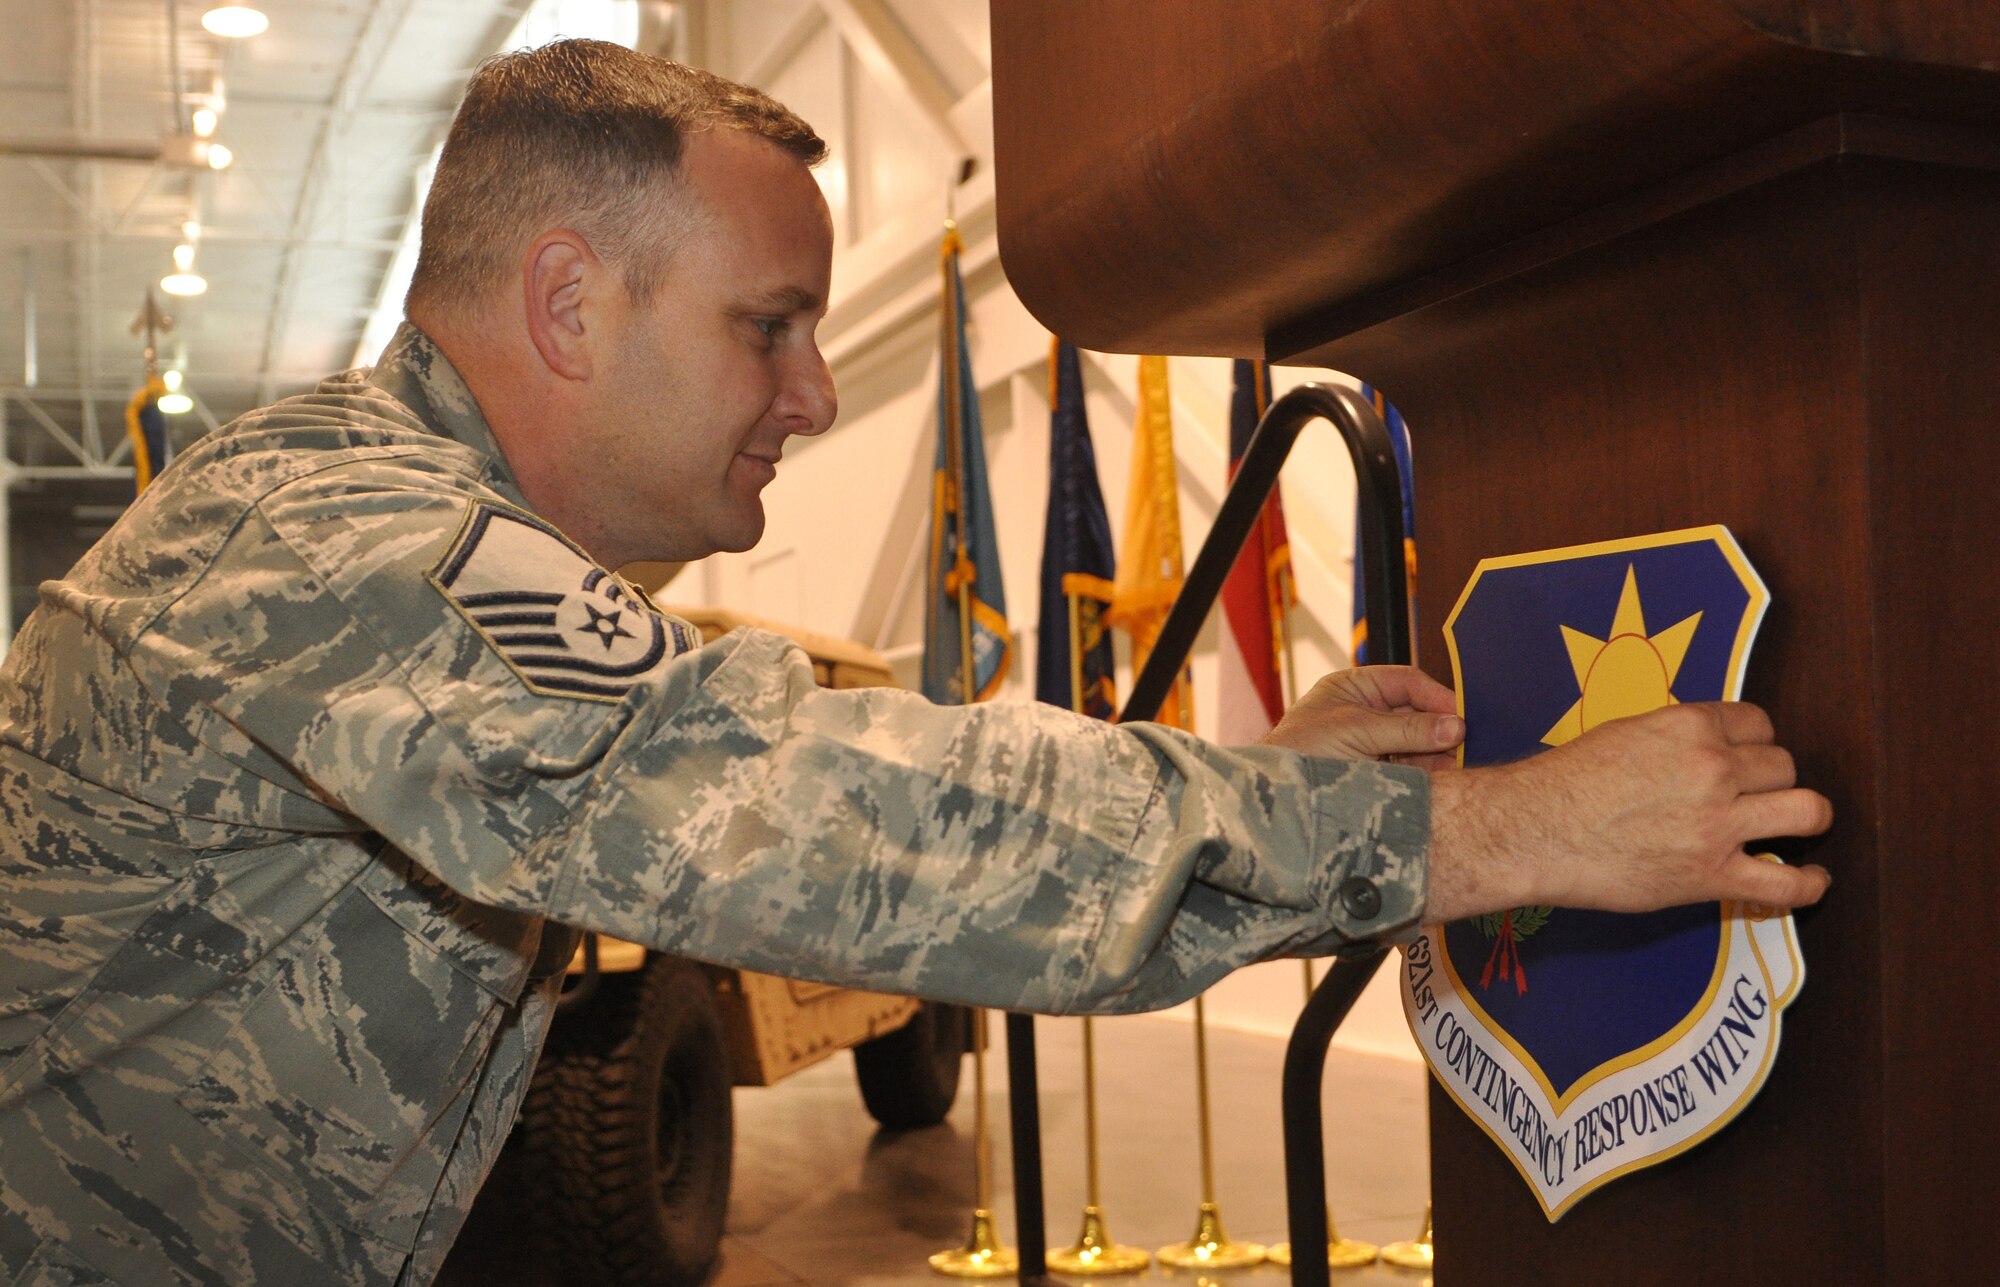 Master Sgt. Jeffrey Steere, assigned to the 573rd Global Support Squadron, attaches the 621st Contingency Response Wing Patch to the podium following the inactivation ceremony of the 615 CRW, May 29, 2012, at Travis Air Force Base, Calif. The 615 CRW ceased its operations as a sister wing, ending seven years of mobility excellence. The inactivation ceremony also included the transfer of command of the two contingency response groups and one contingency operations group to the 621st Contingency Response Wing, headquartered at Joint Base McGuire-Dix-Lakehurst, N.J. (U.S. Air Force Photo / Master Sgt. Stan Parker)